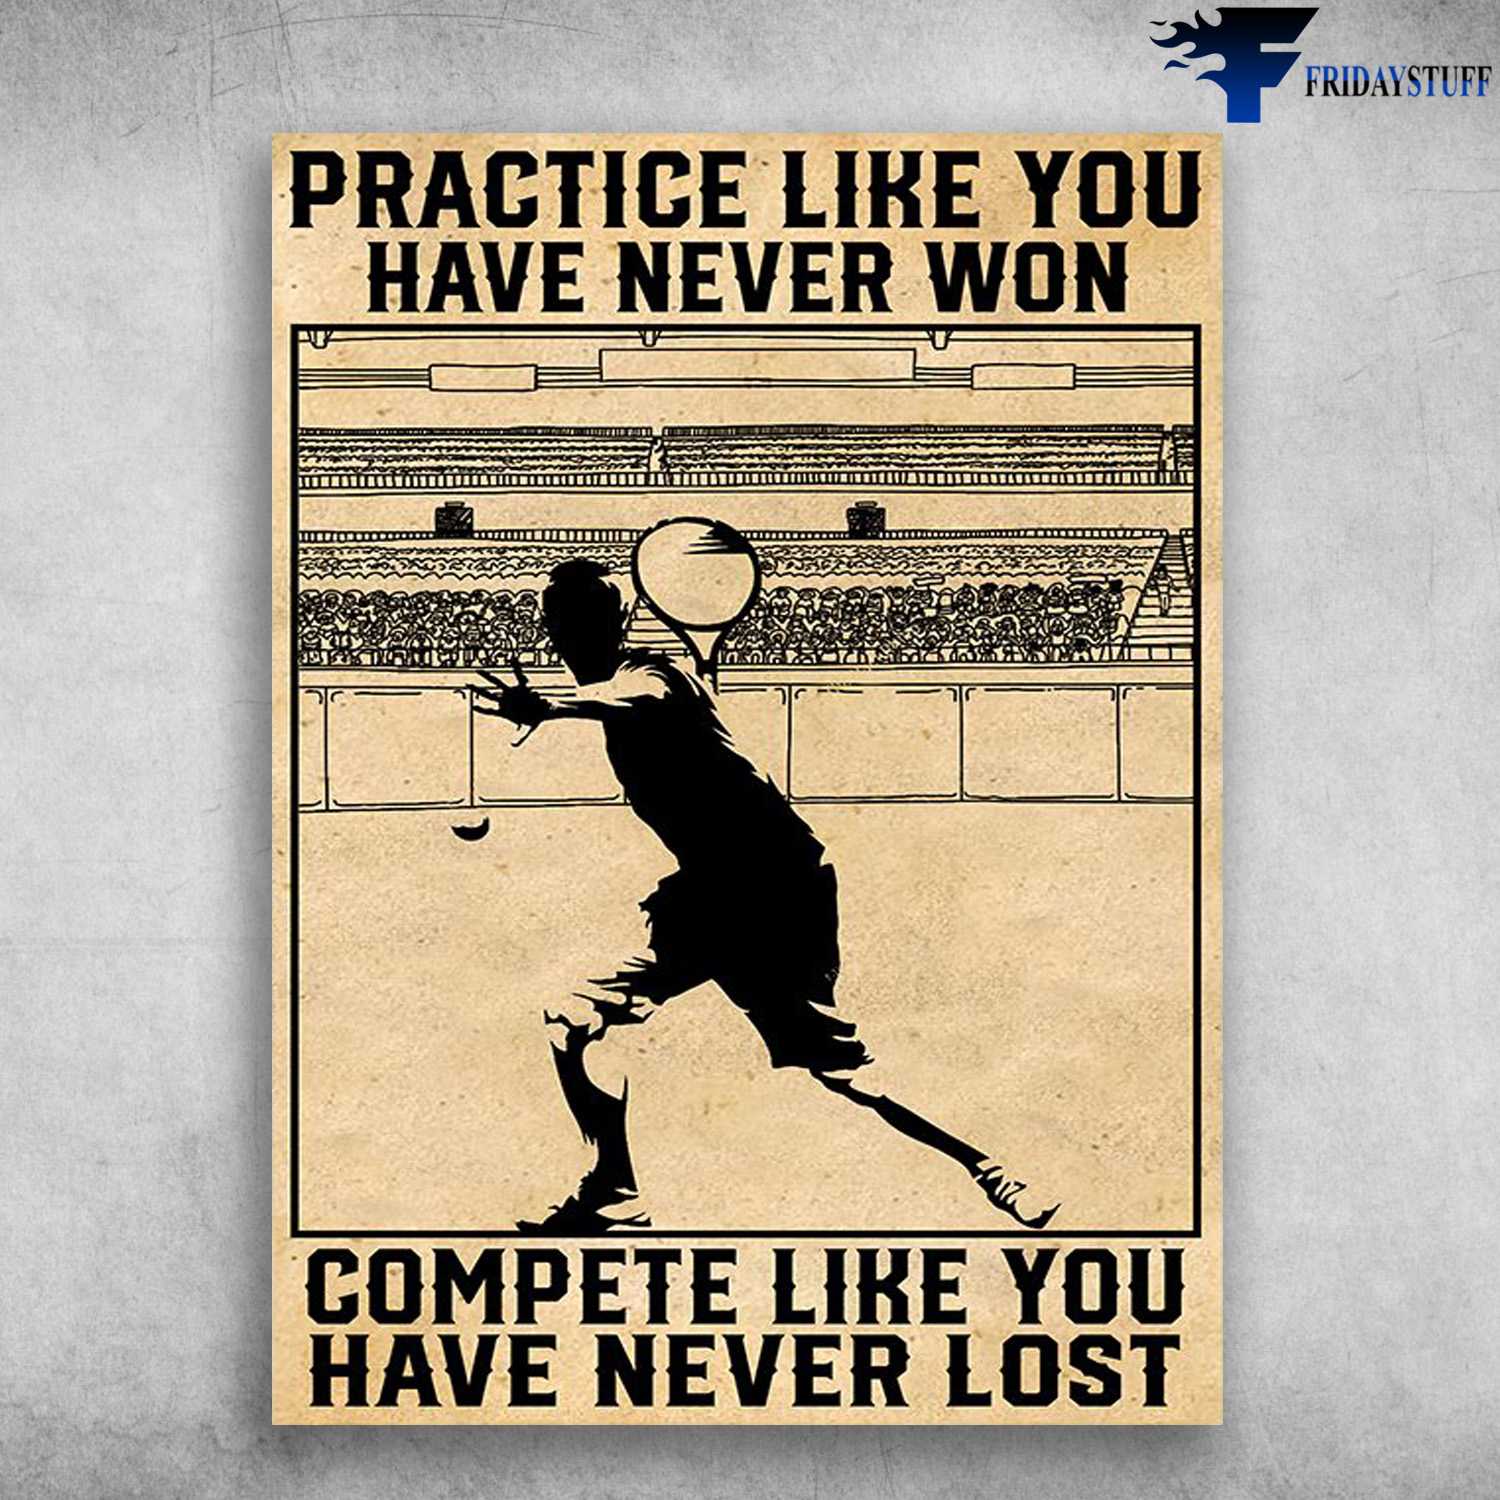 Tennis Player, Tennis Poster, Practice Like You Never Won, Complete Like You Have Never Lost